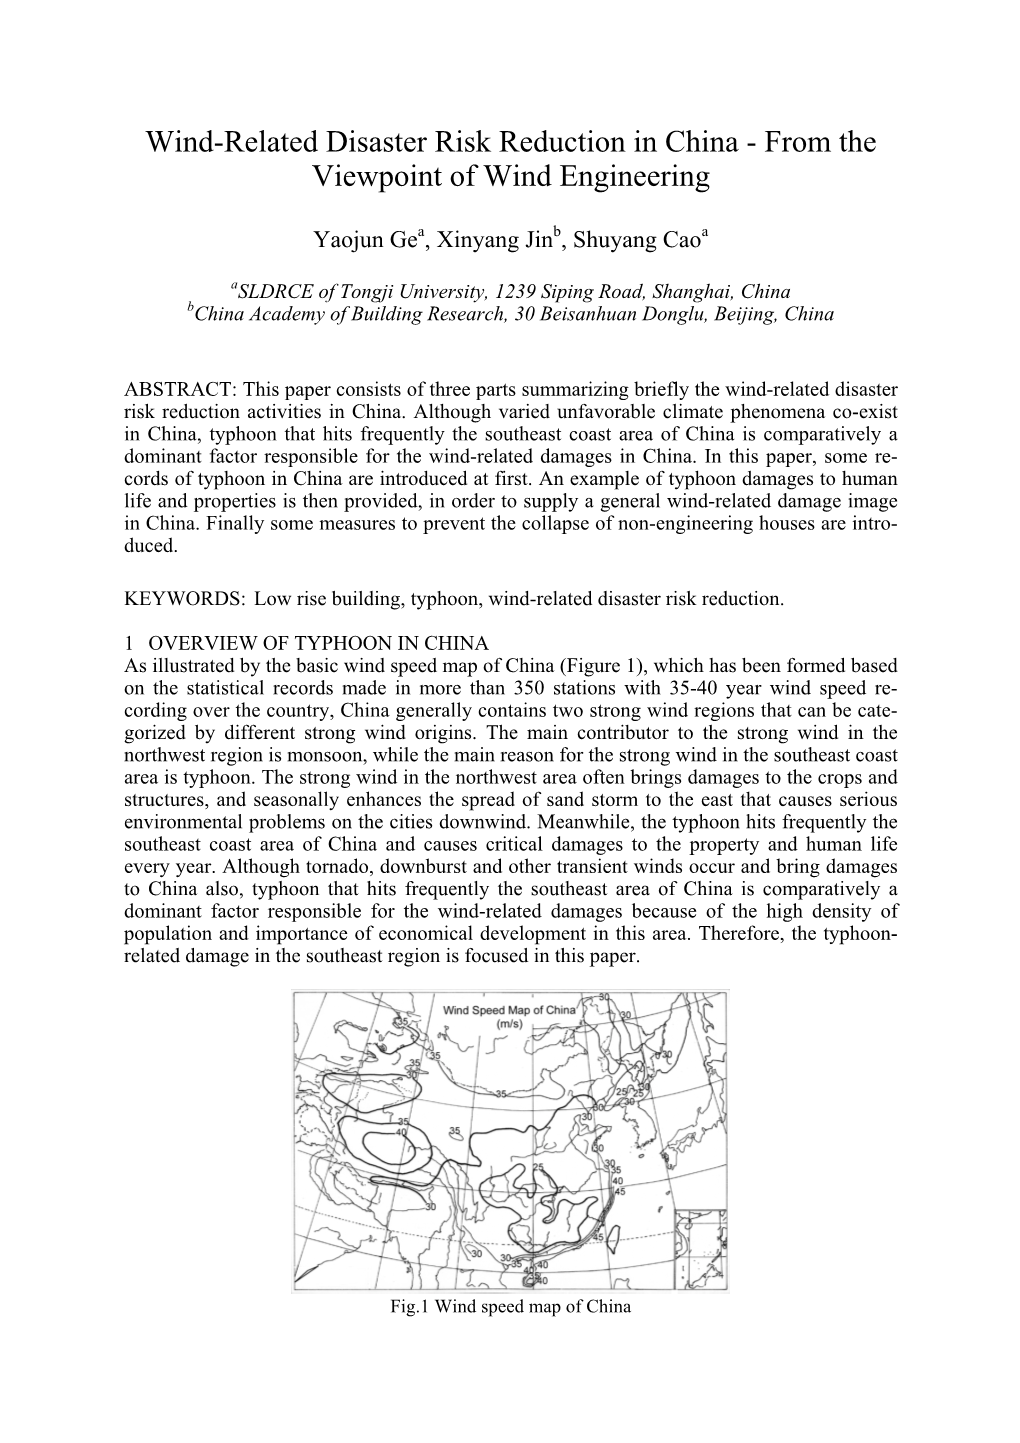 Wind-Related Disaster Risk Reduction in China - from the Viewpoint of Wind Engineering